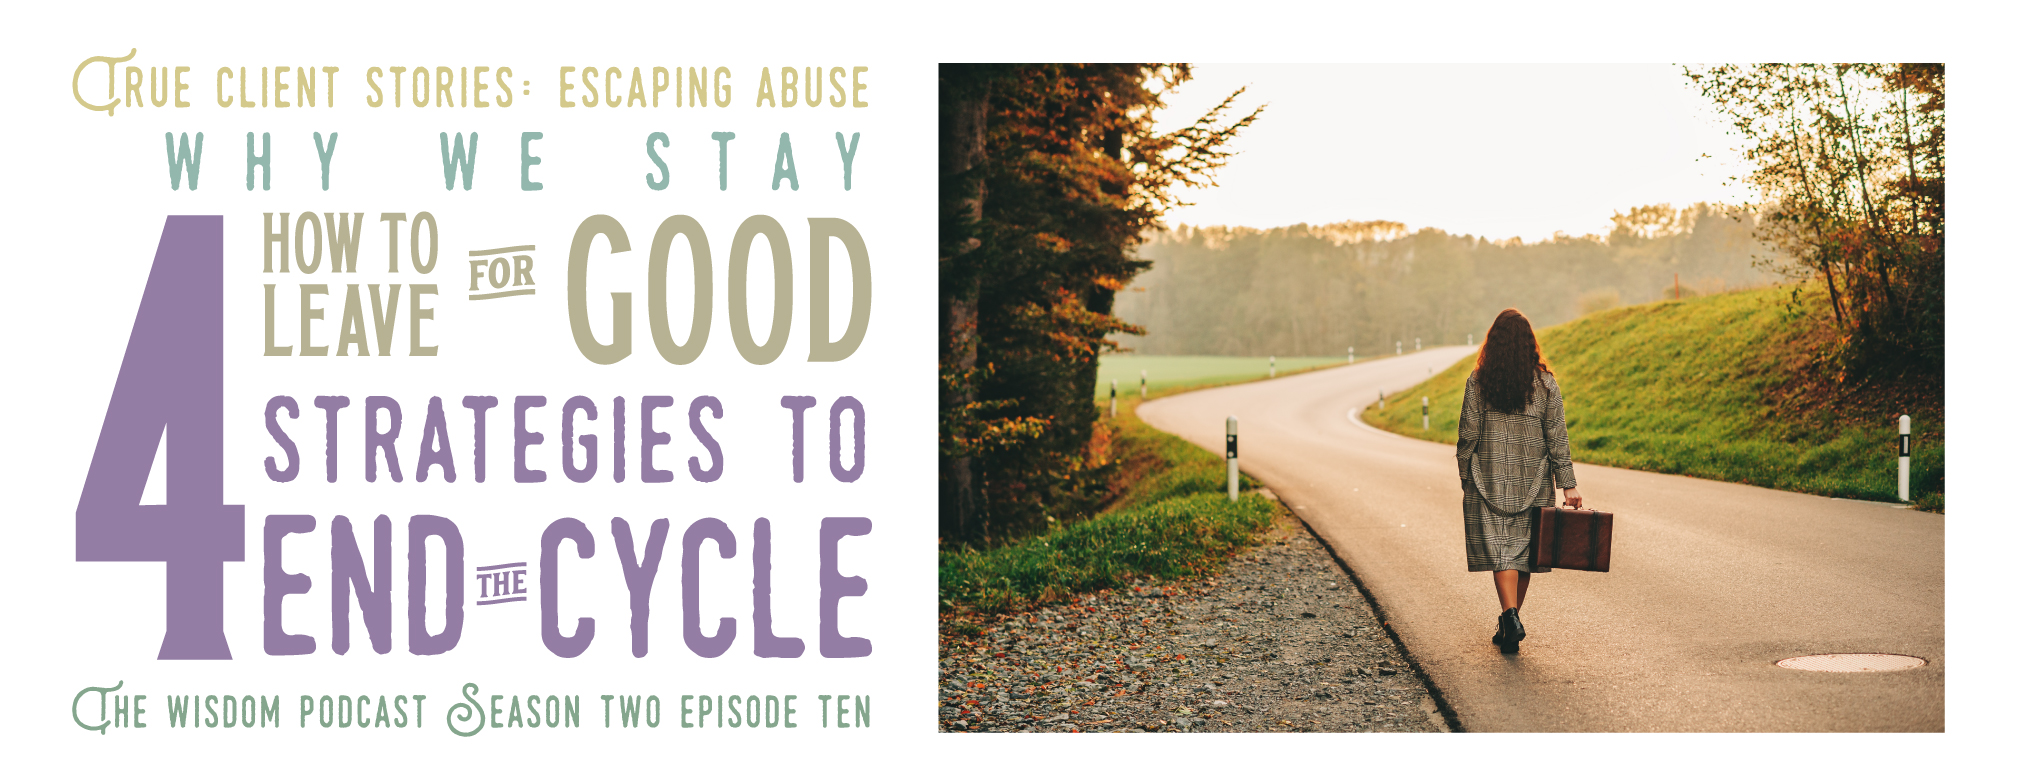 listen to: true client stories: escaping abuse: why we stay, how to leave for good; 4 strategies to end the cycle - season two episode ten - the wisdom podcast | truth serum, a-ha moments and practical wisdom for life, love and self-realization